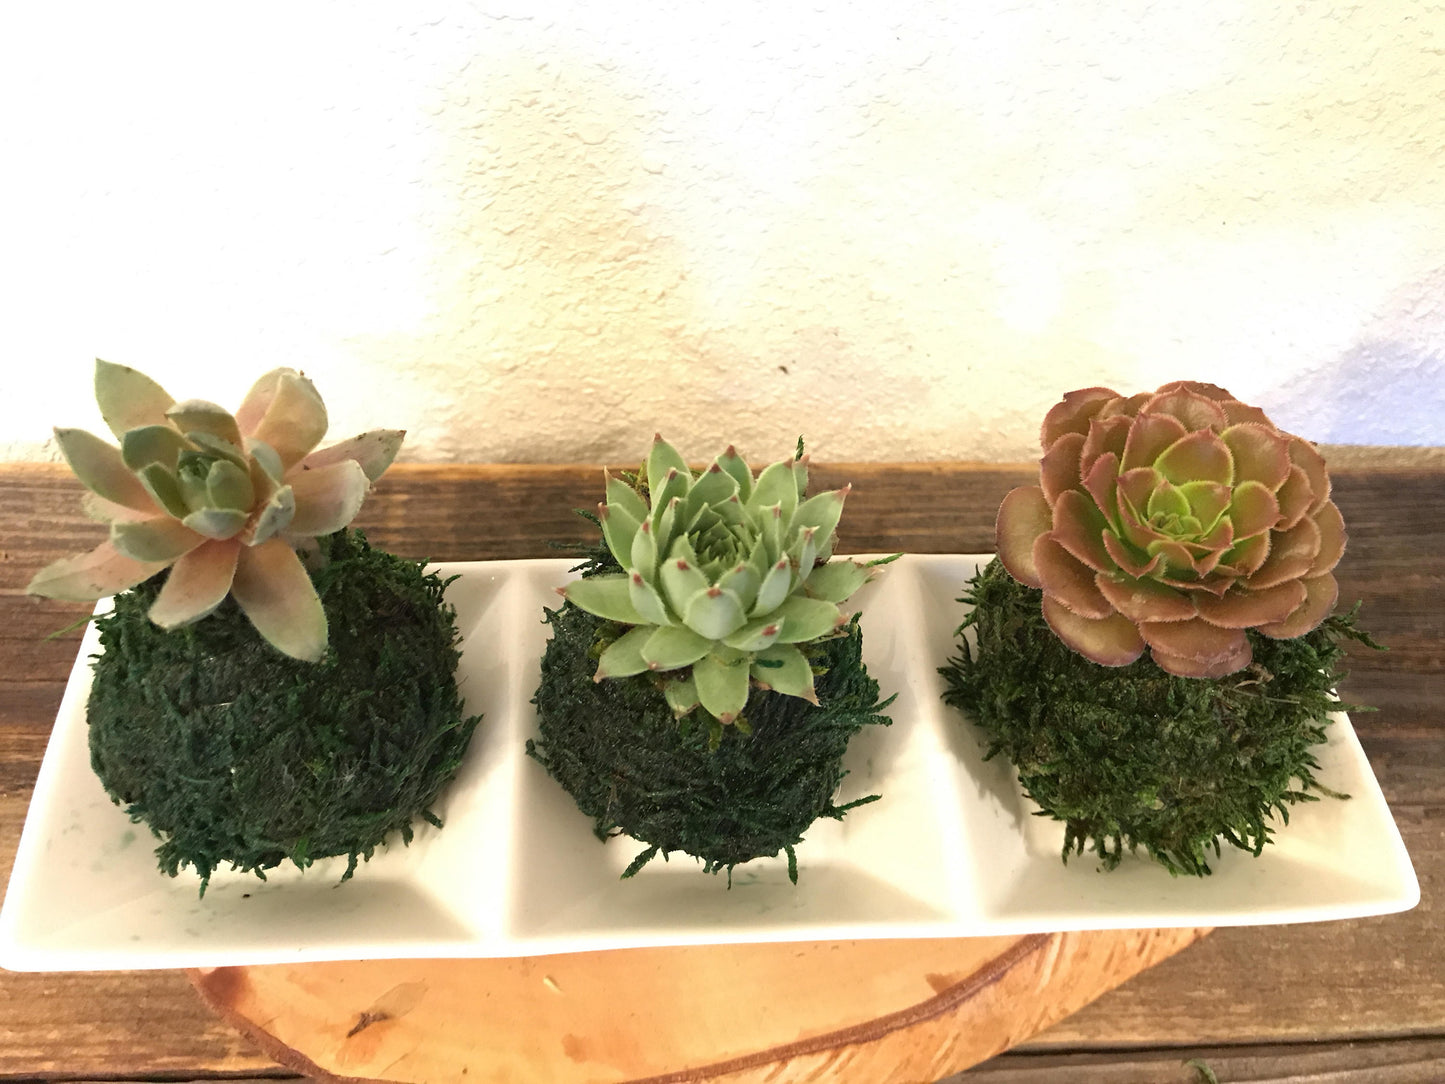 Mini succulents Kokedama - lowest price if you buy three! Available from one kokedama purchase.